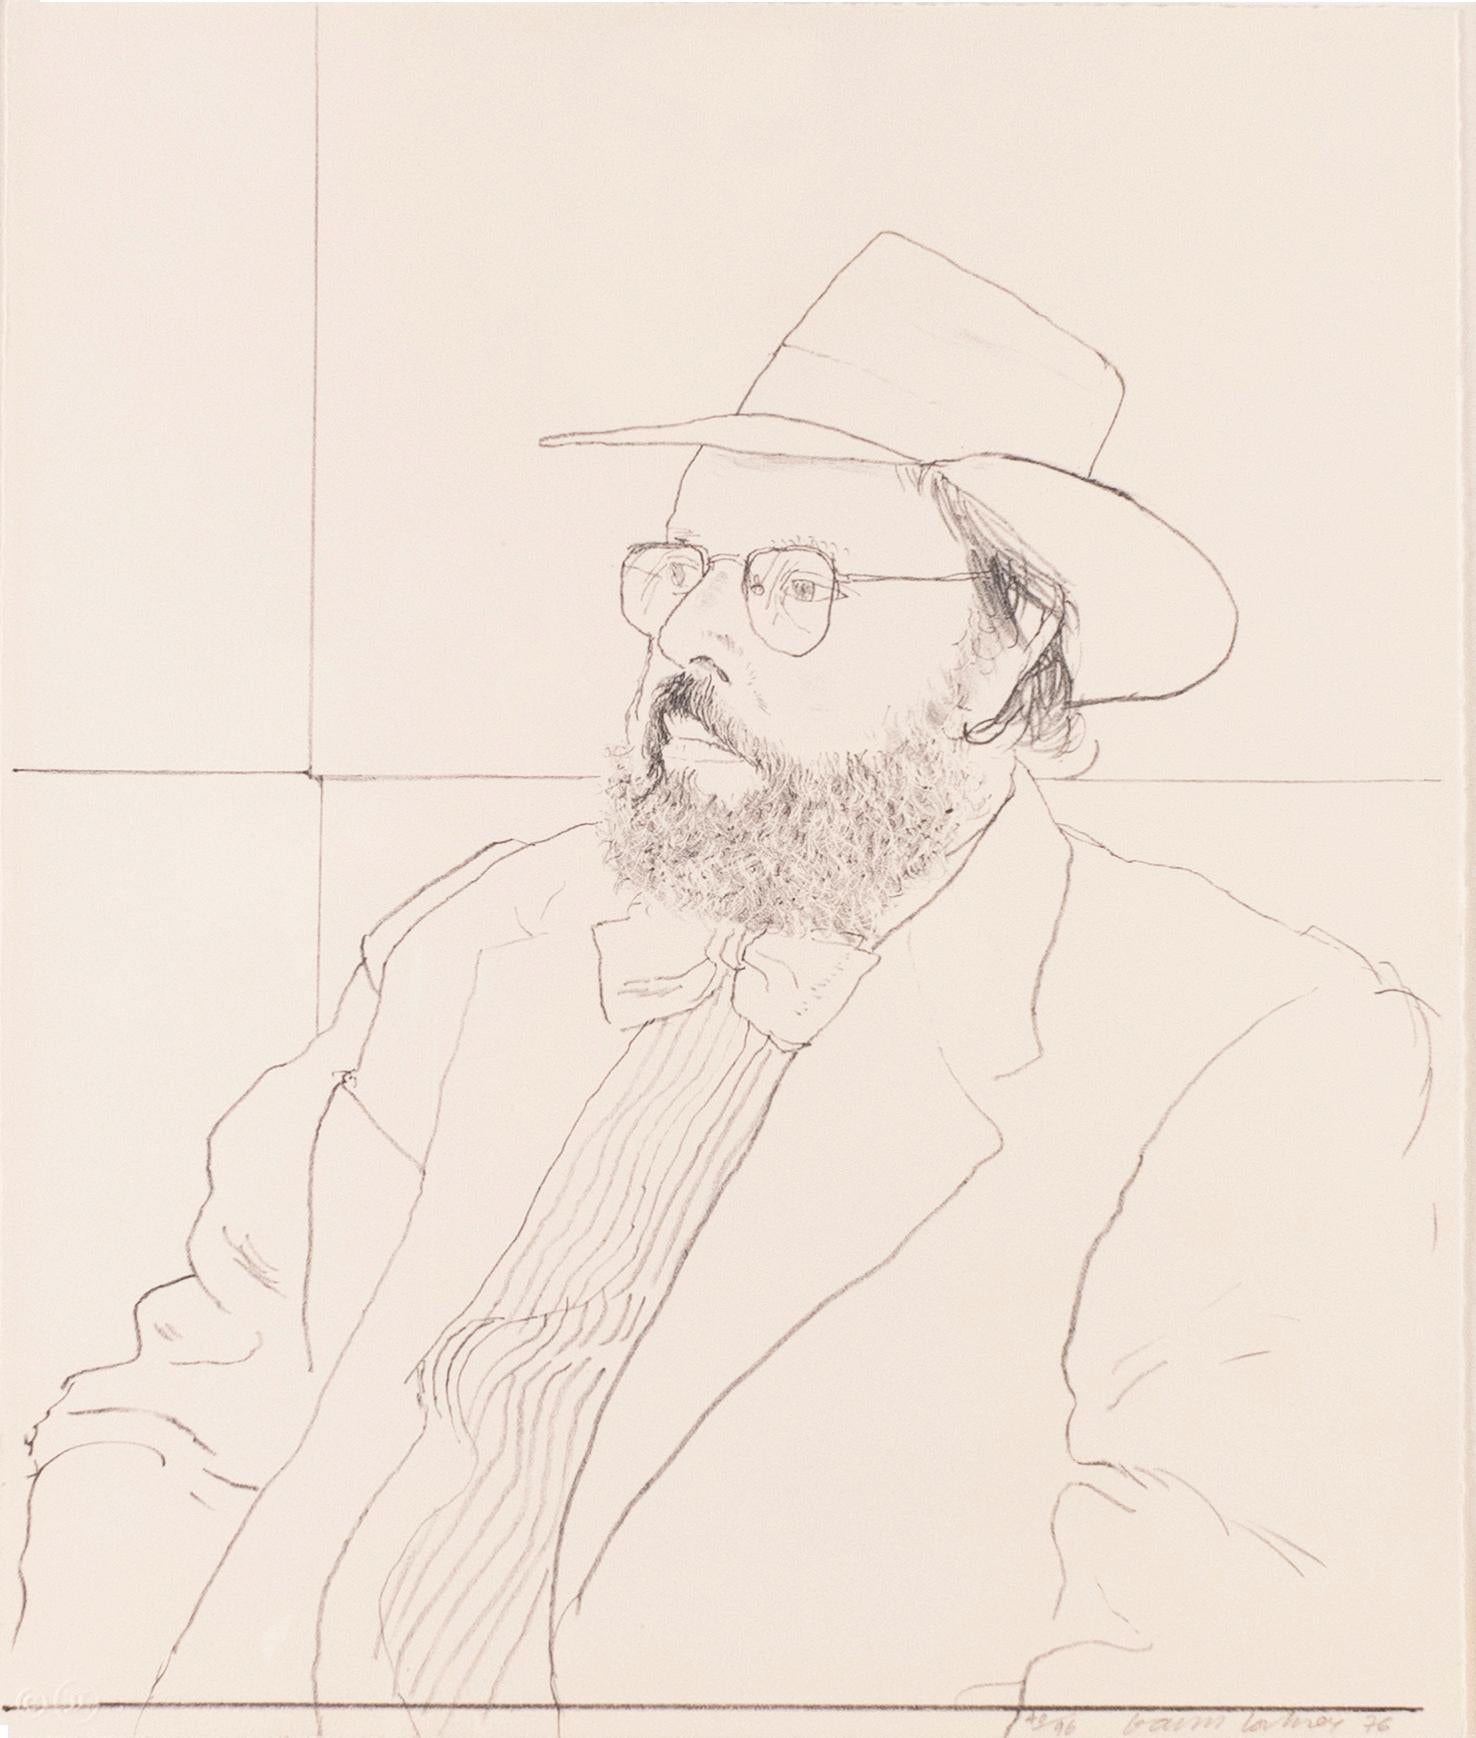 This black and white portrait showcases David Hockney's fine drawing skill, depicting Henry Geldzahler, famed curator at the Metropolitan Museum of Art, New York. Hockney and Geldzahler met at Andy Warhol’s Factory in 1963, and would become fast